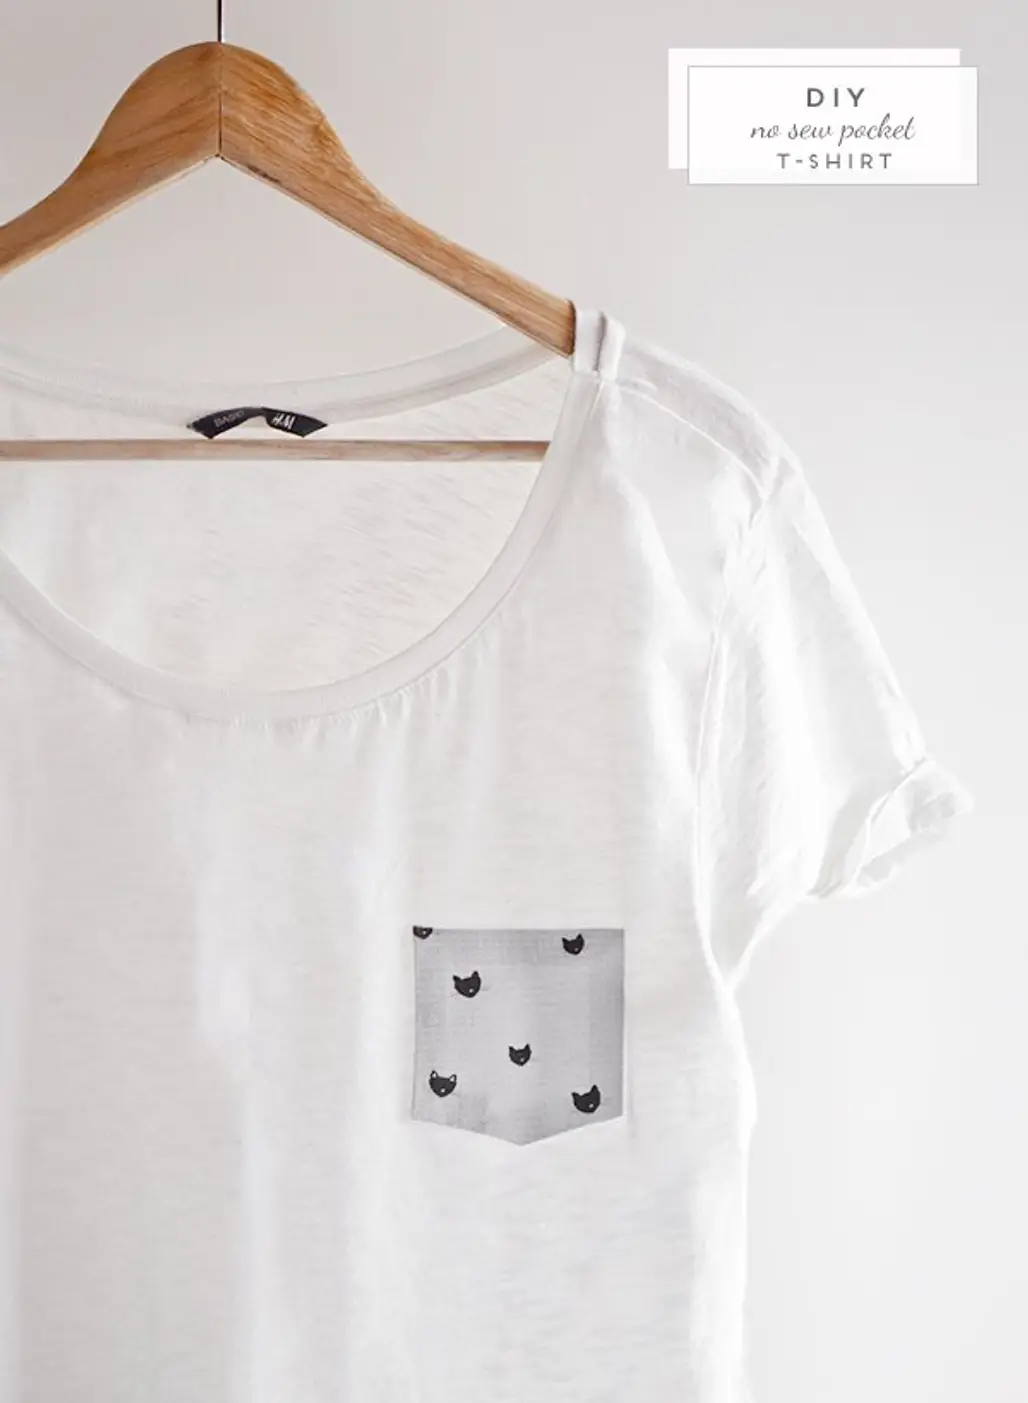 Add a Cute Pocket to Your Tee